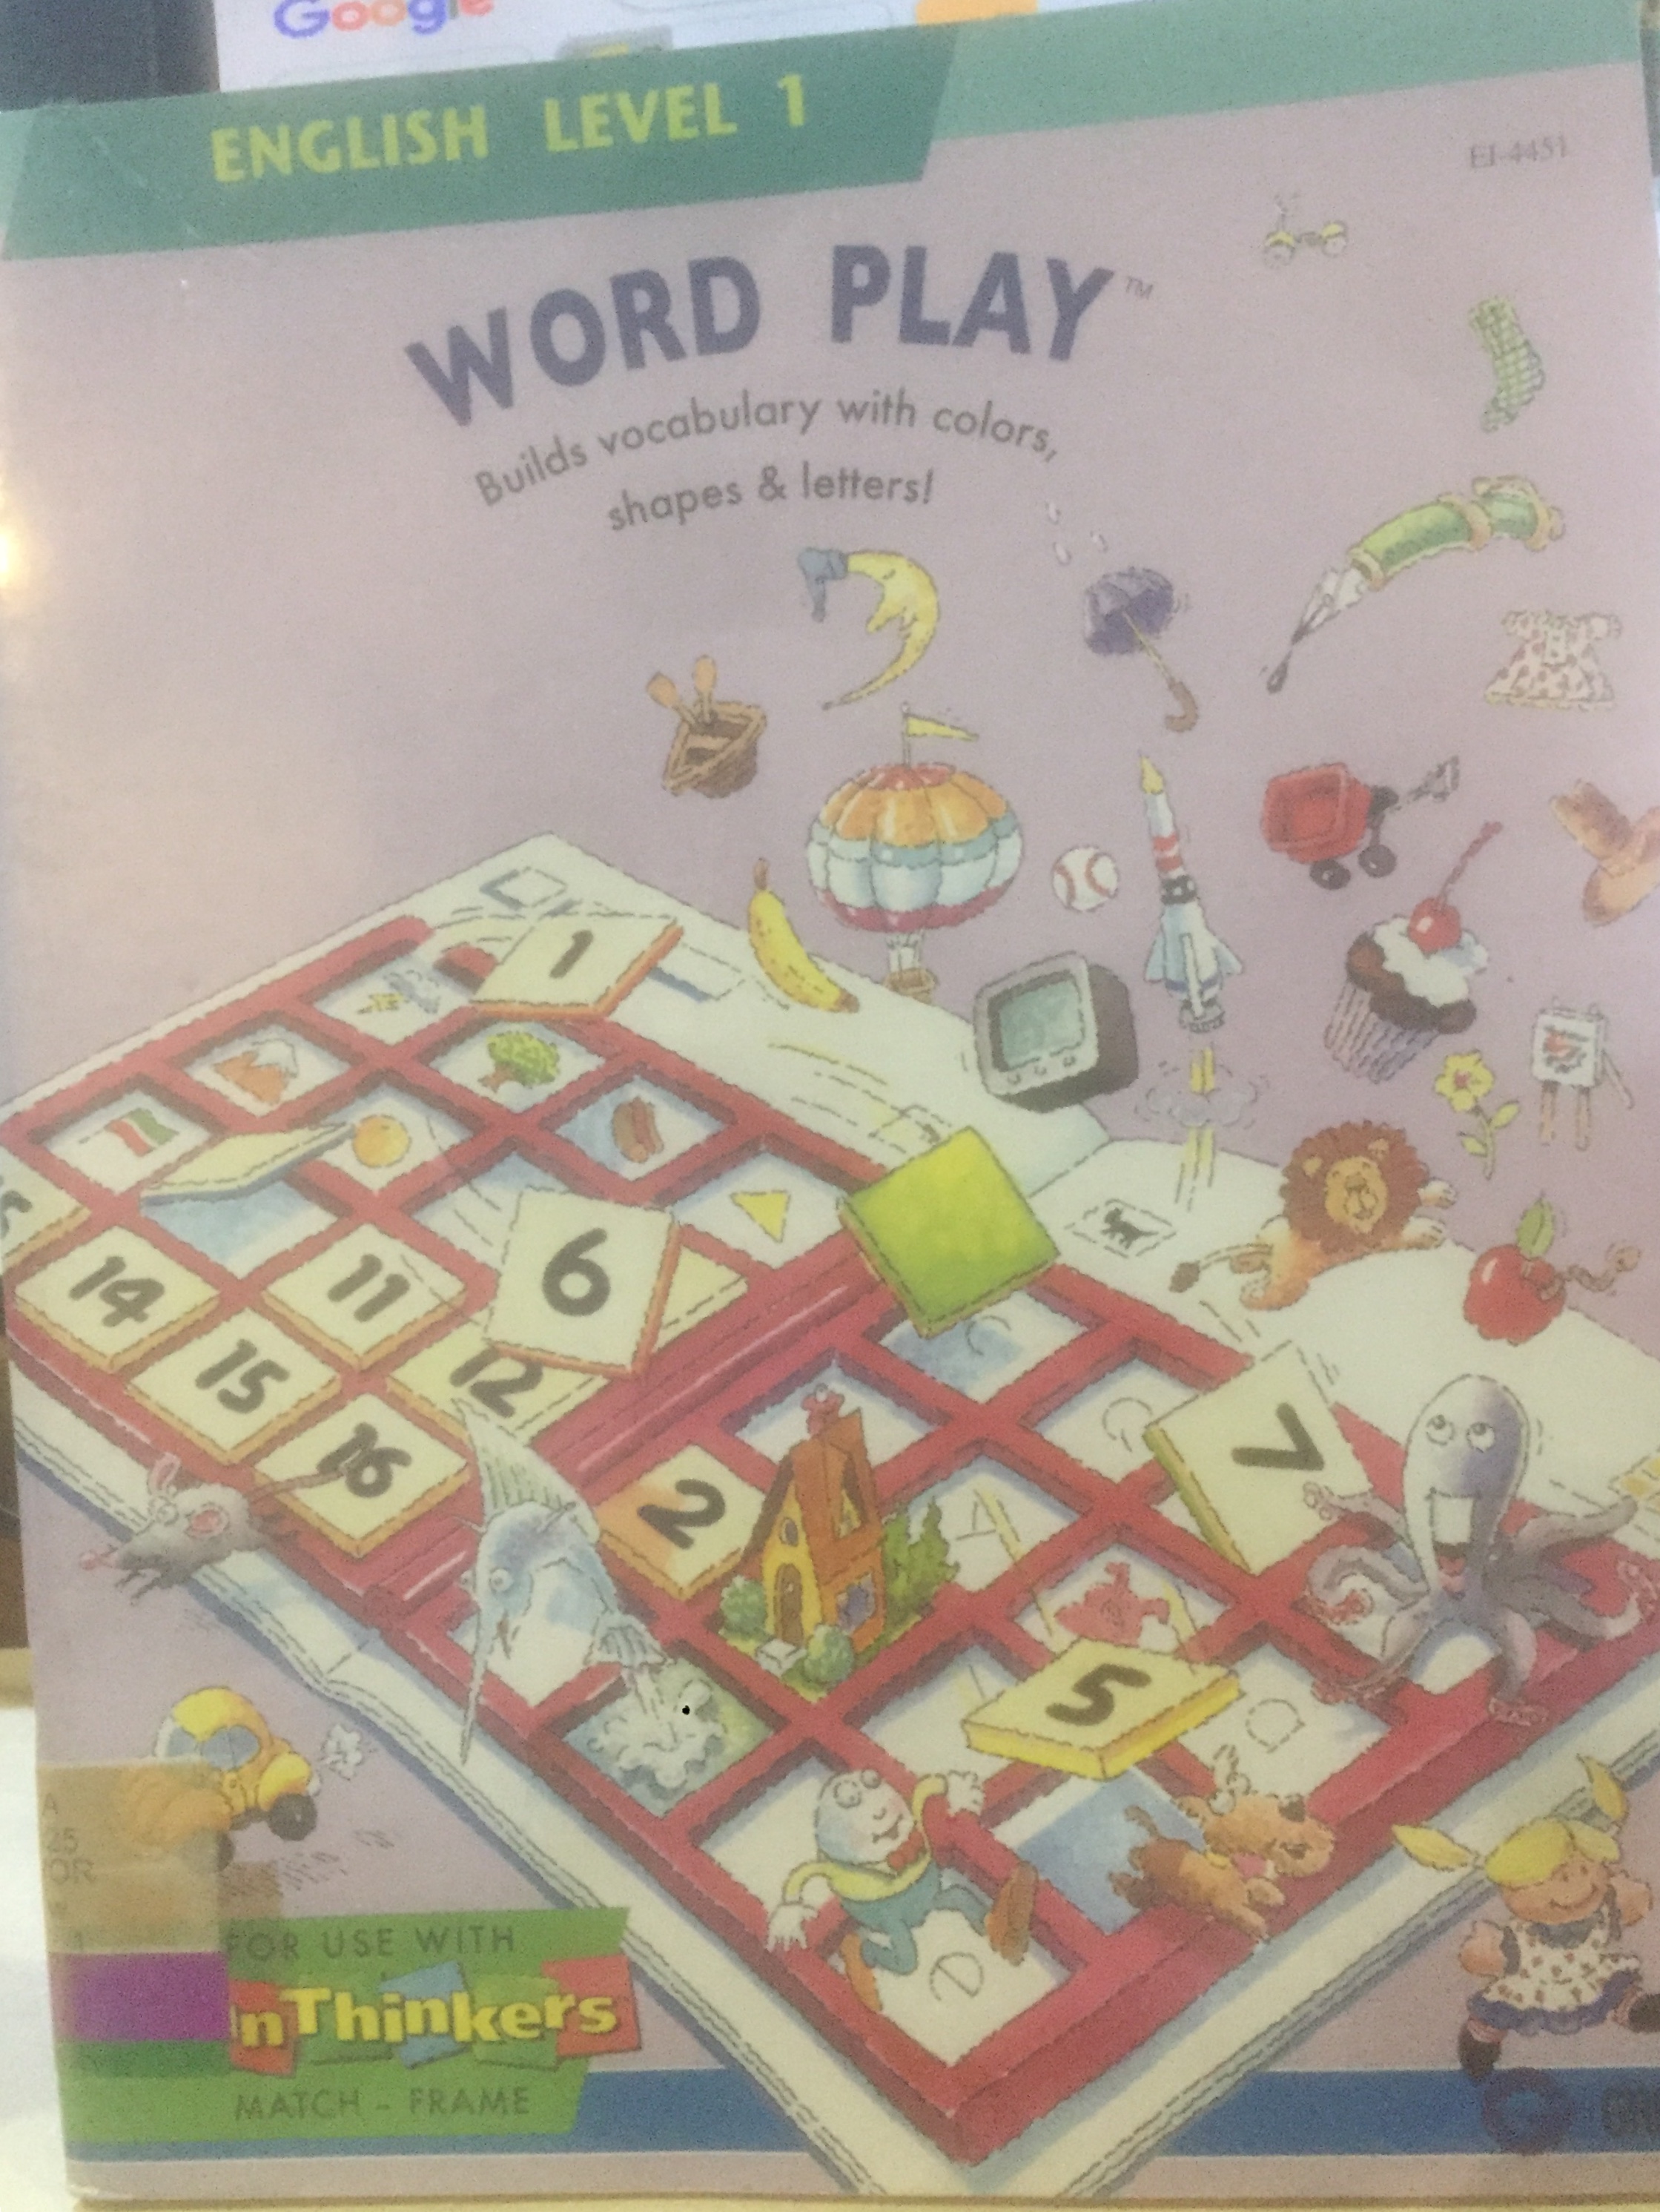 Word Play :  Build vocabulary with colors, shapes letters